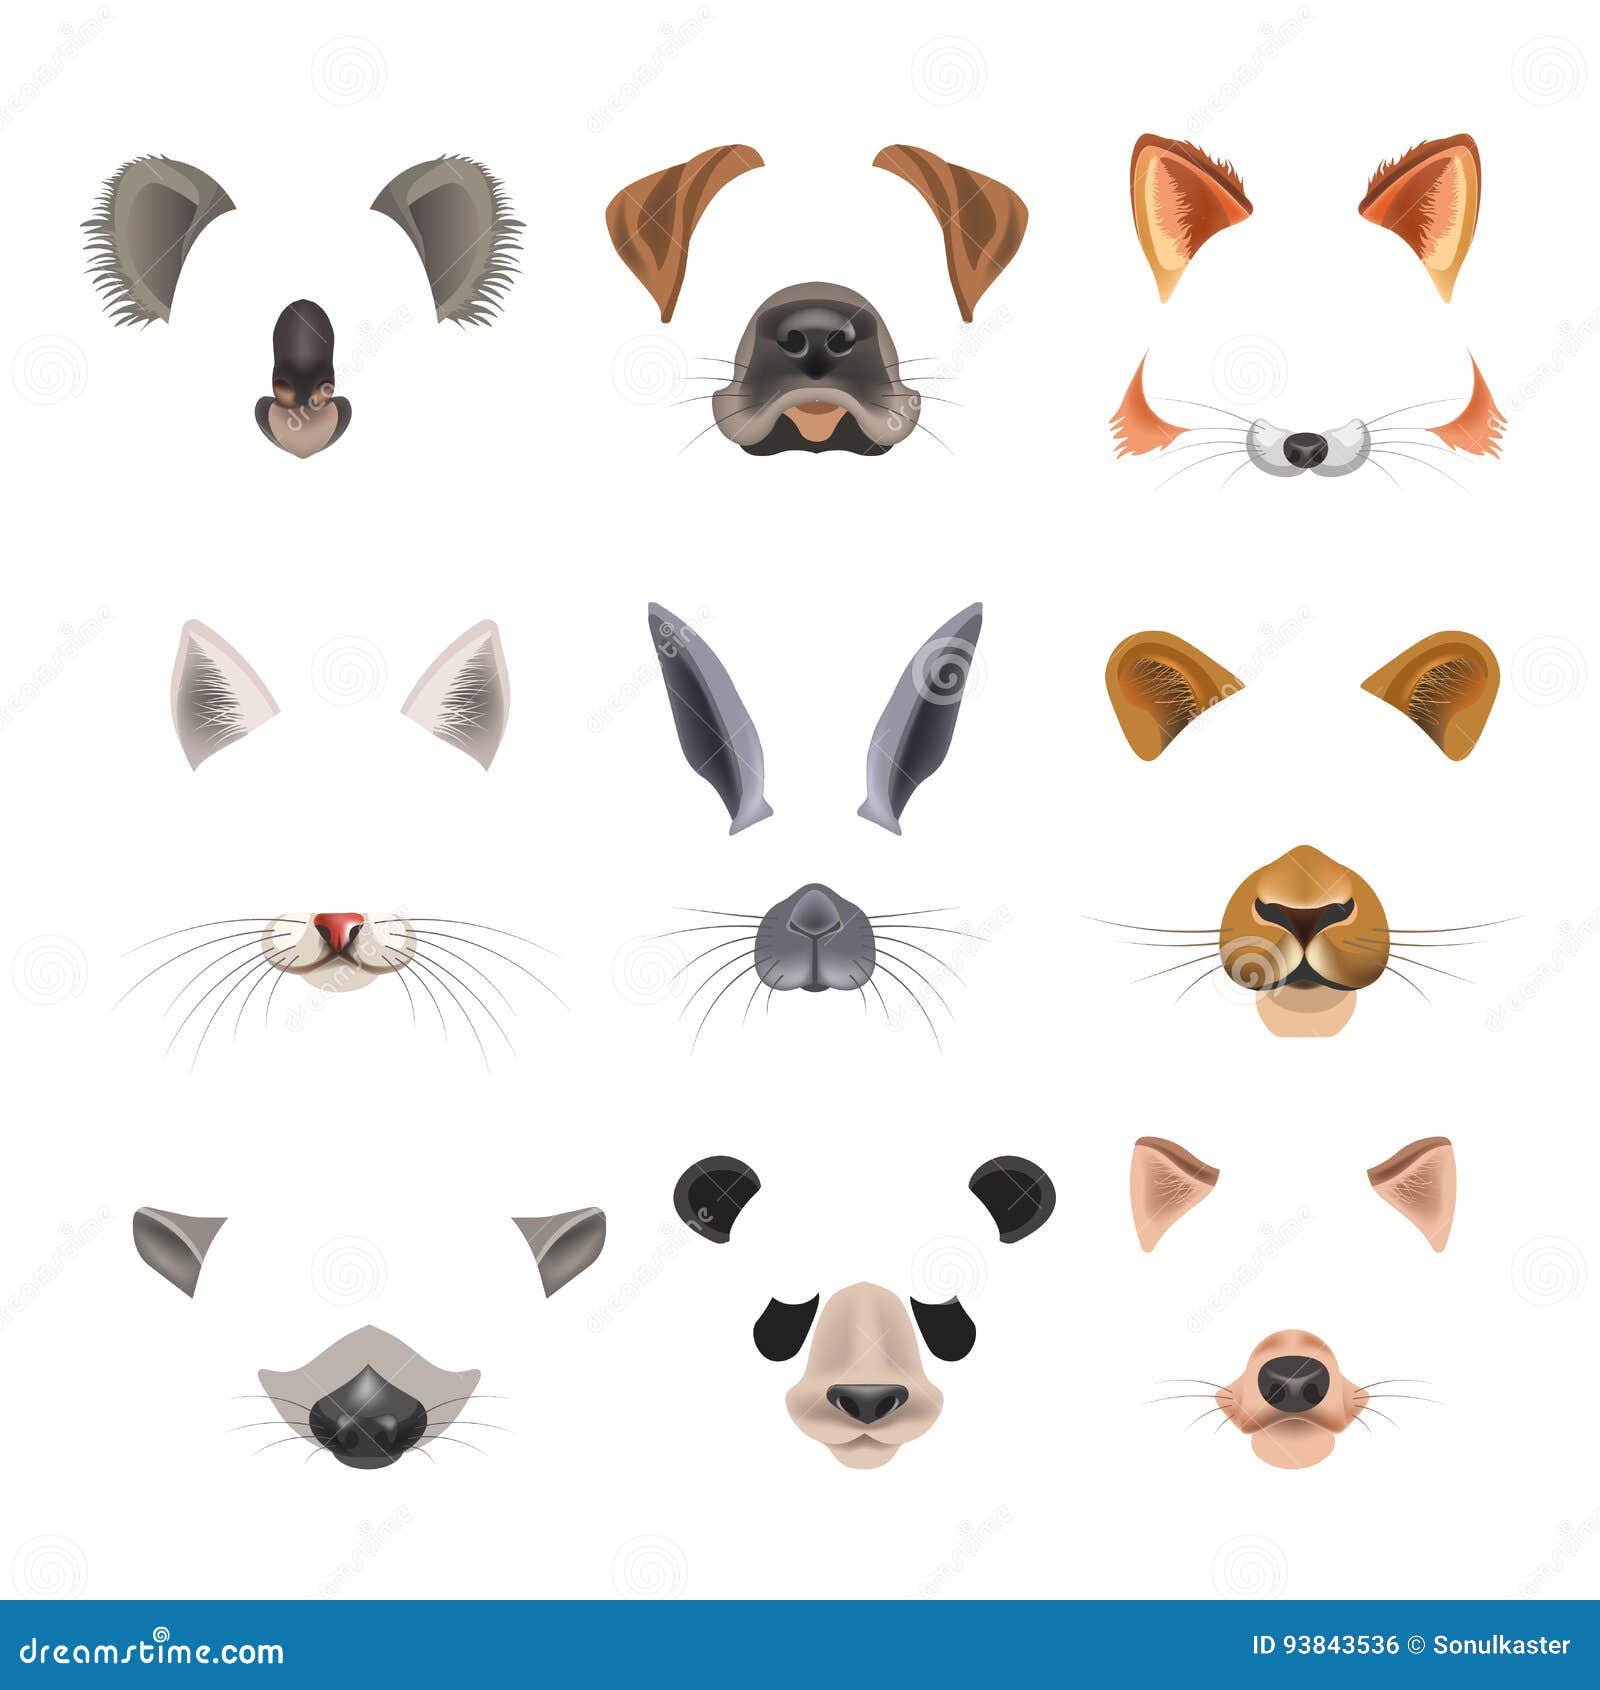 Video Chat Effects Animal Faces Flat Icons Templates of Dog, Rabbit, Cat  Stock Vector - Illustration of mobile, flat: 93843536